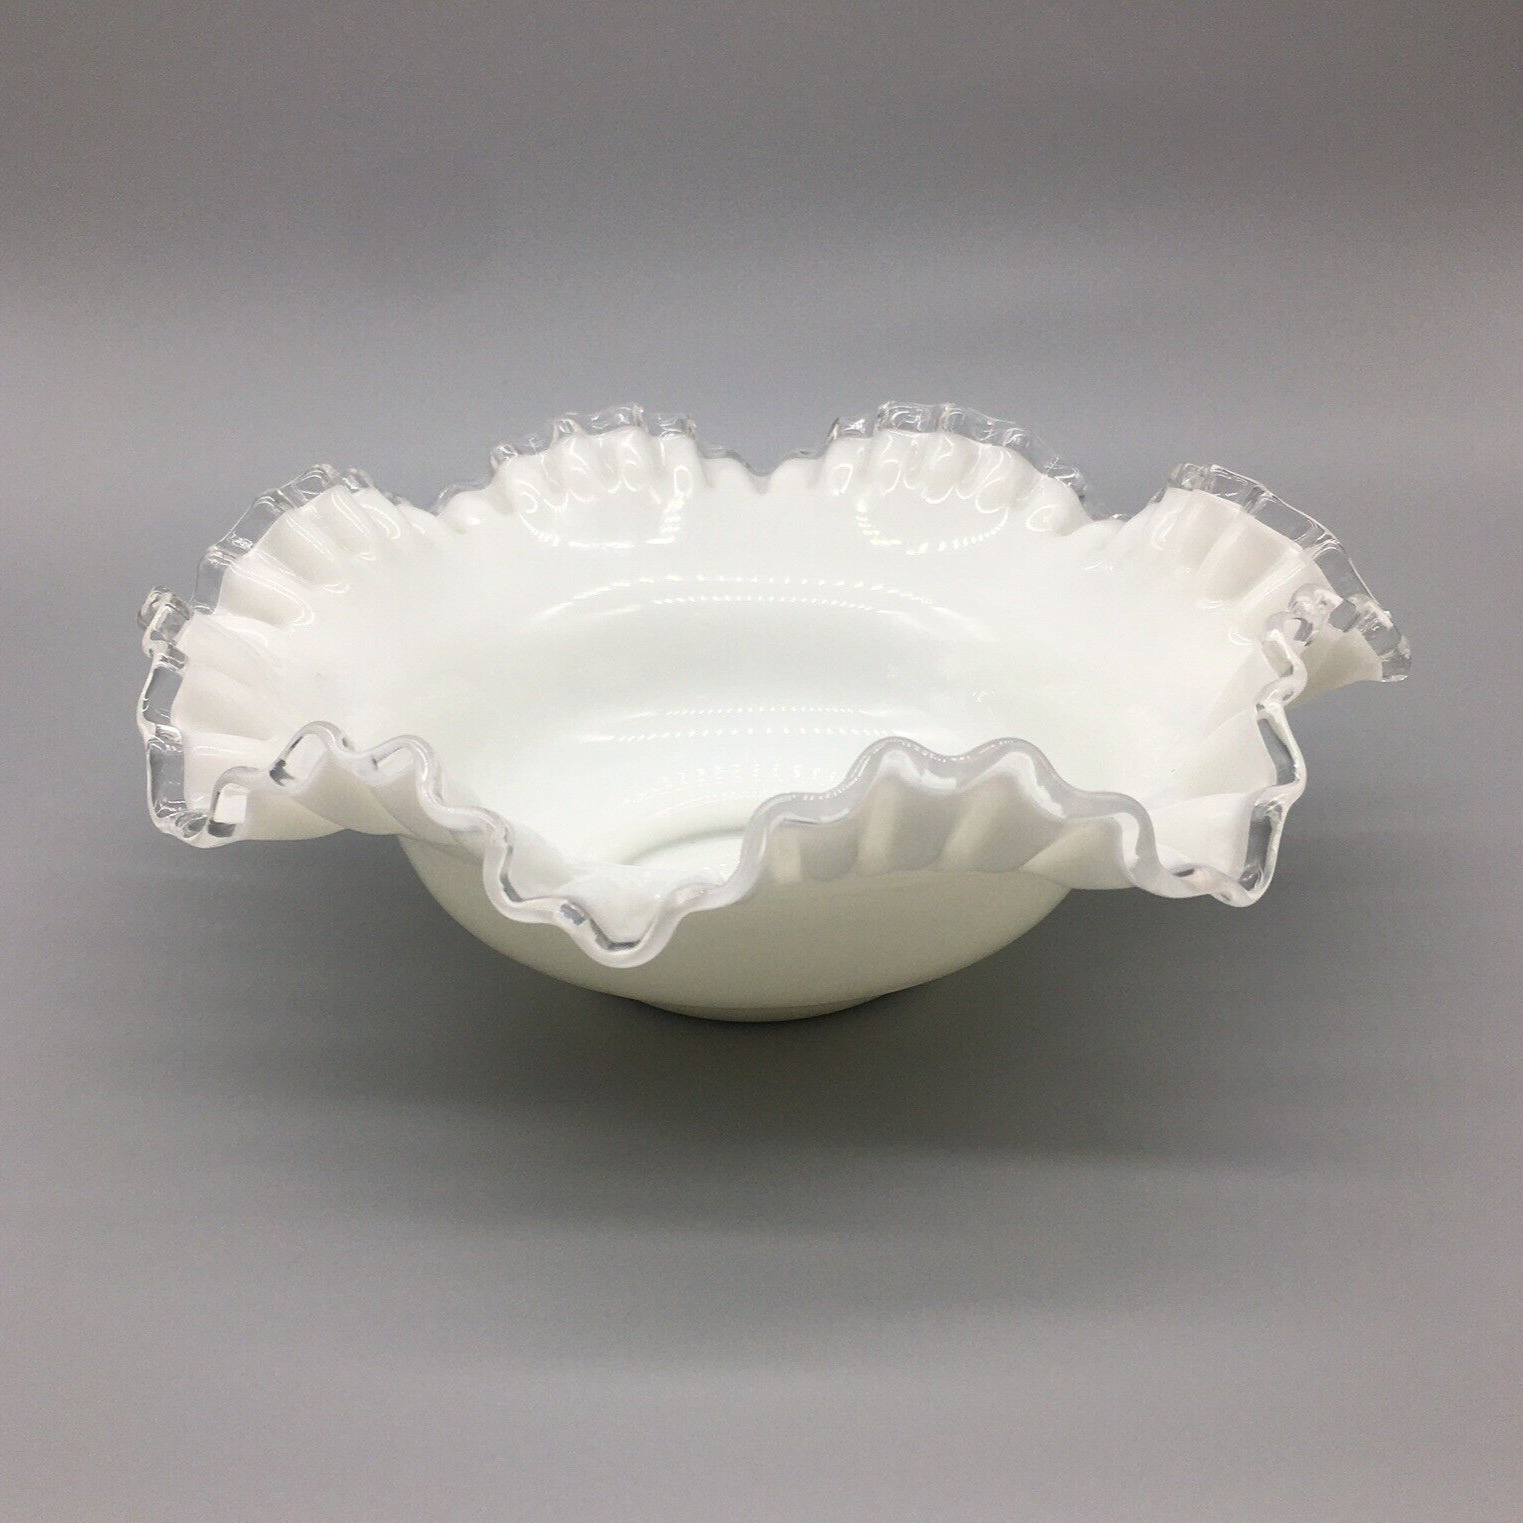 Vintage Fenton Silver Crest Milk Glass 5 1/2” Ruffled Edge Pre Owned USA Made